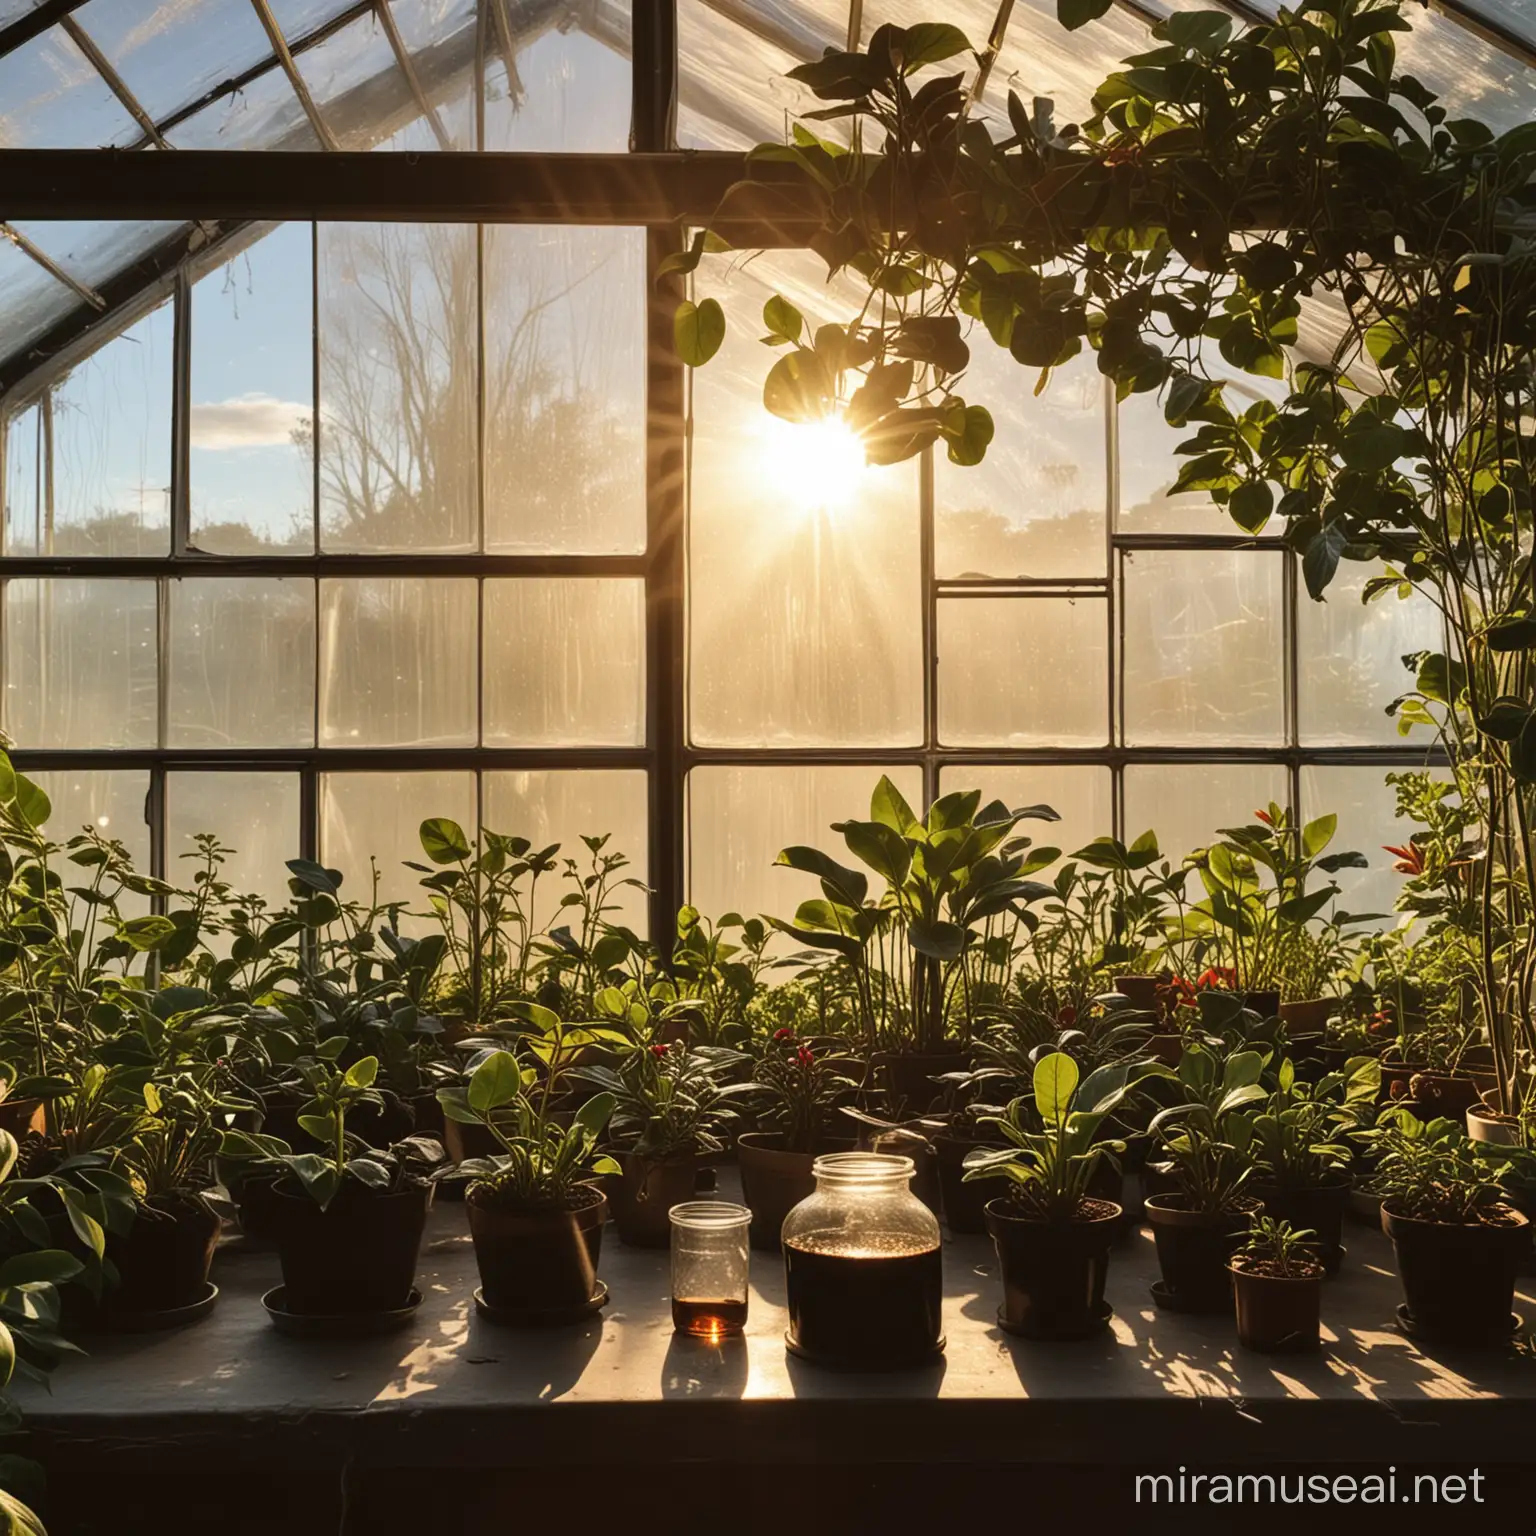 Sunlit Greenhouse with Glass Beaker and Potted Plants